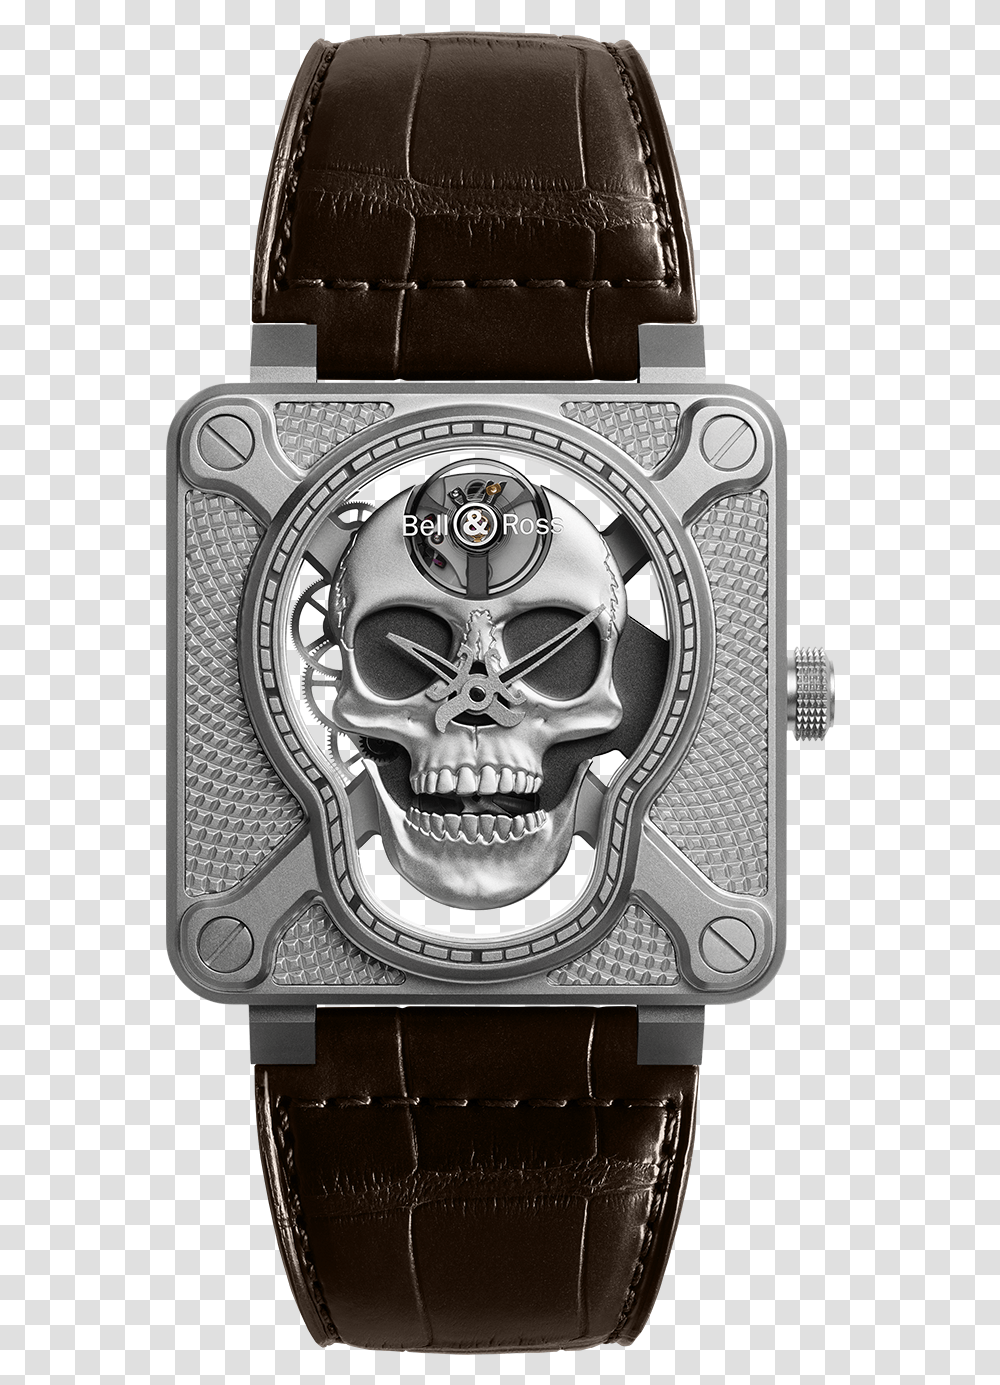 Bell Amp Ross Watch Price, Wristwatch, Rotor, Coil, Machine Transparent Png